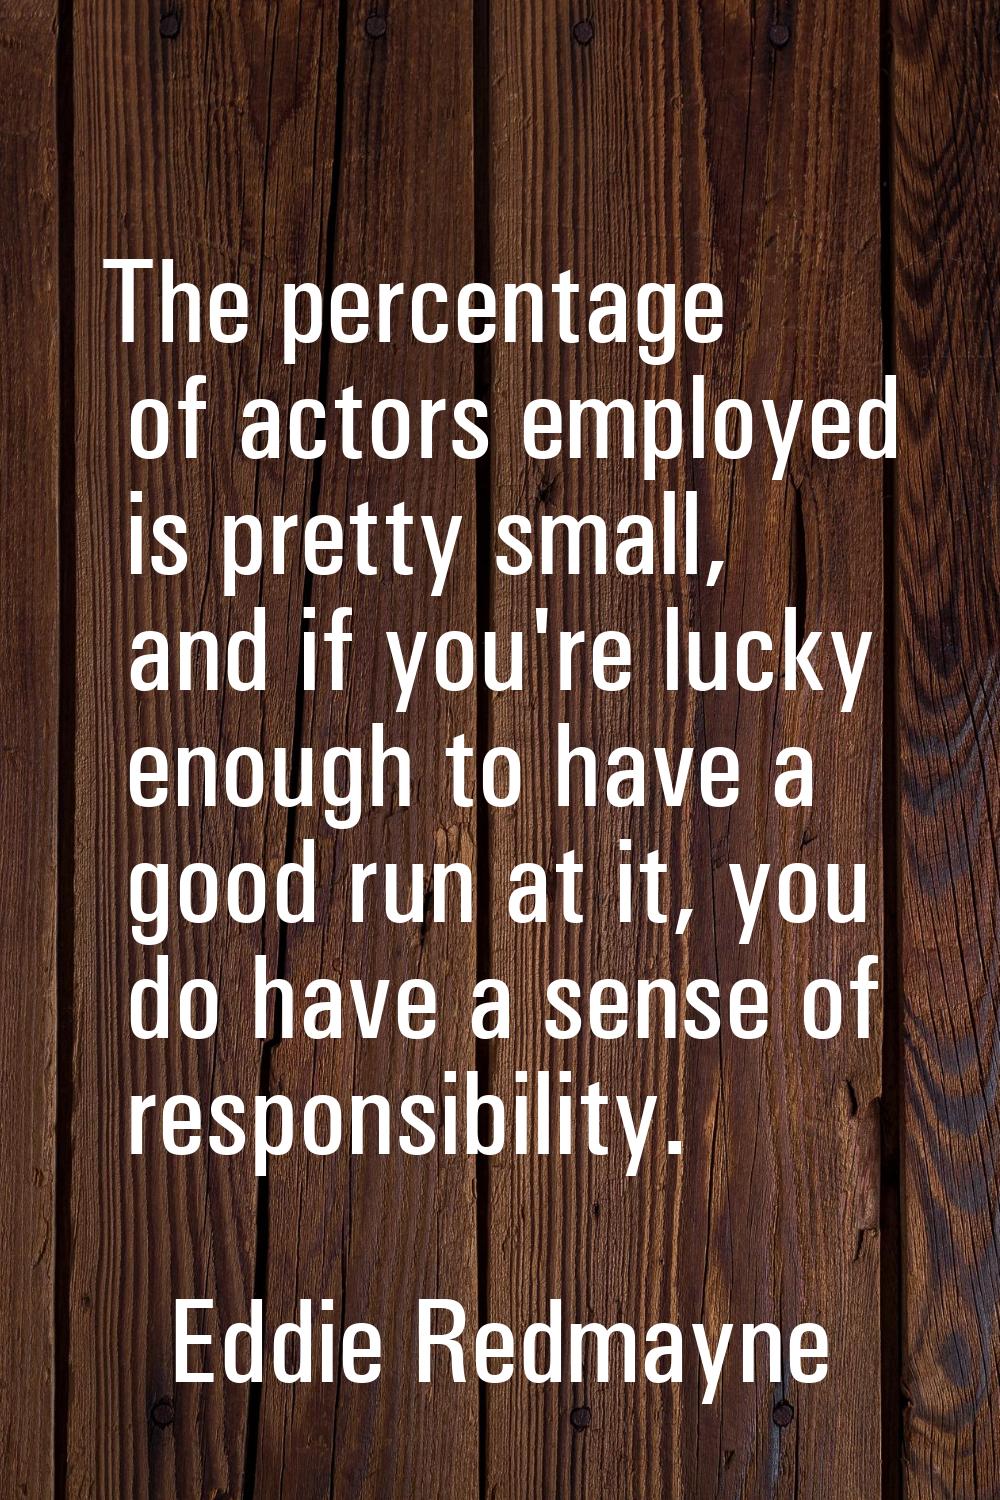 The percentage of actors employed is pretty small, and if you're lucky enough to have a good run at